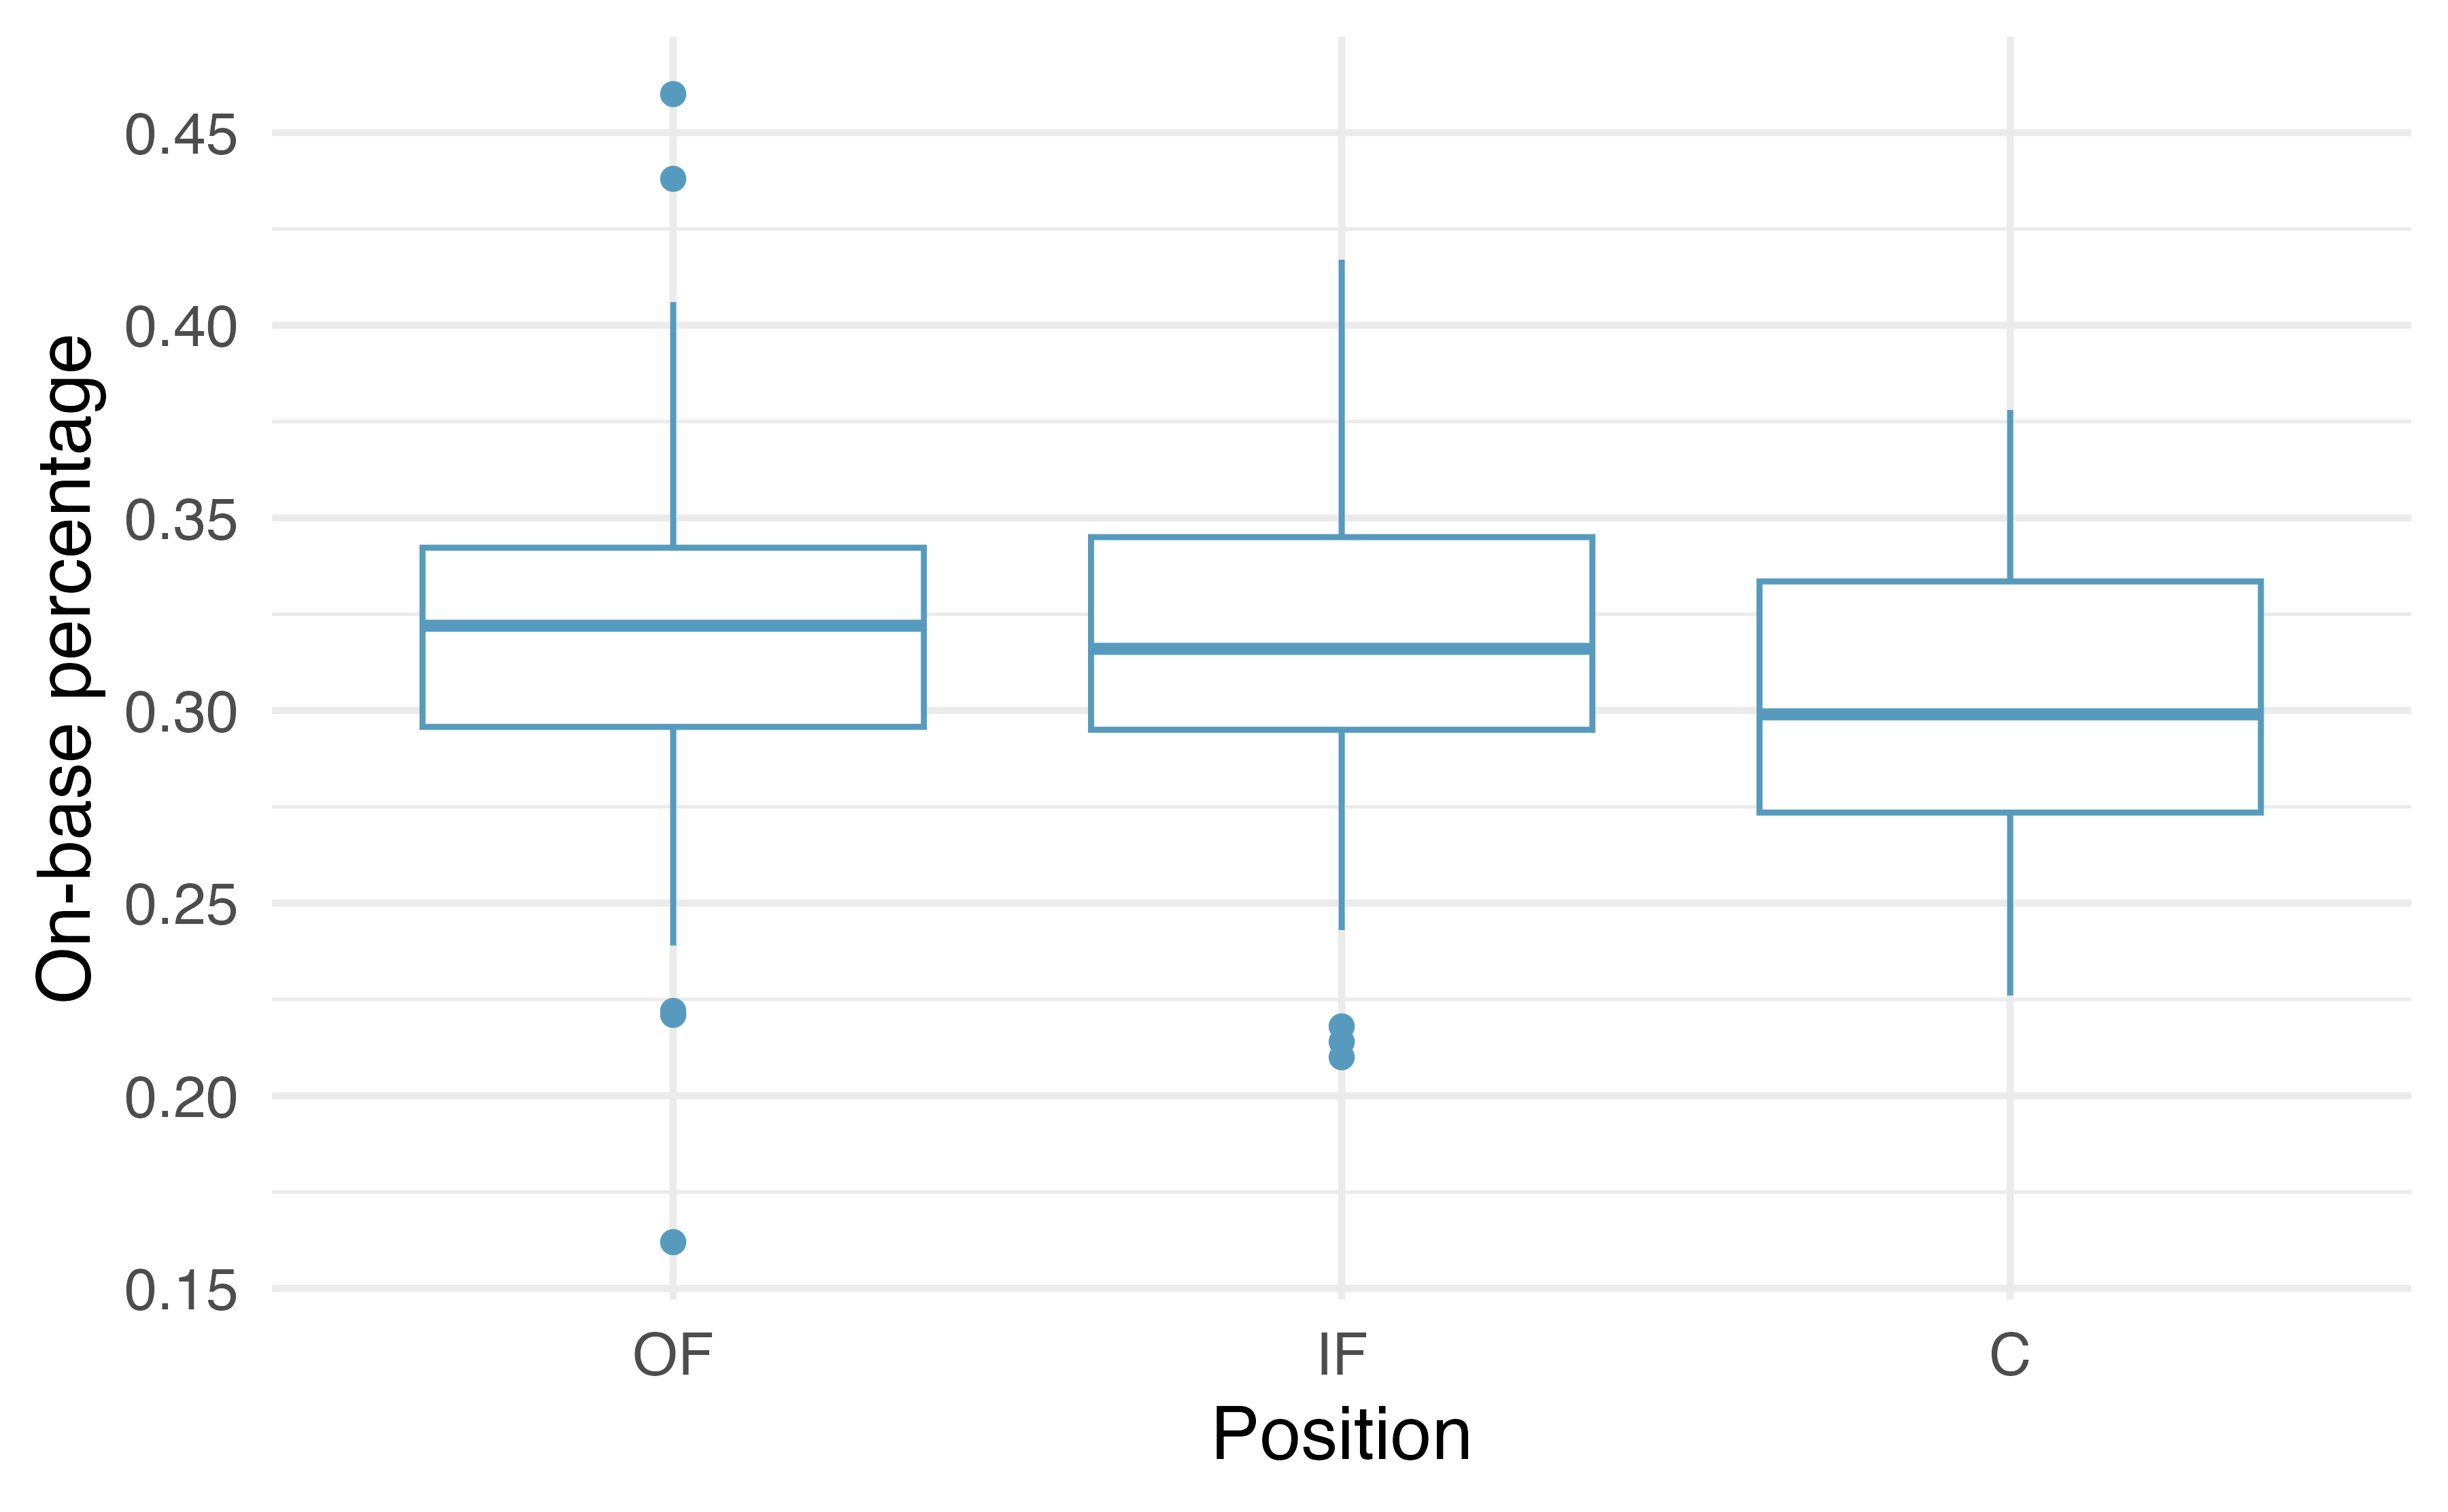 Side-by-side box plot of the on-base percentage for 429 players across three groups. There is one prominent outlier visible in the infield group, but with 205 observations in the infield group, this outlier is not extreme enough to have an impact on the calculations, so it is not a concern for moving forward with the analysis.